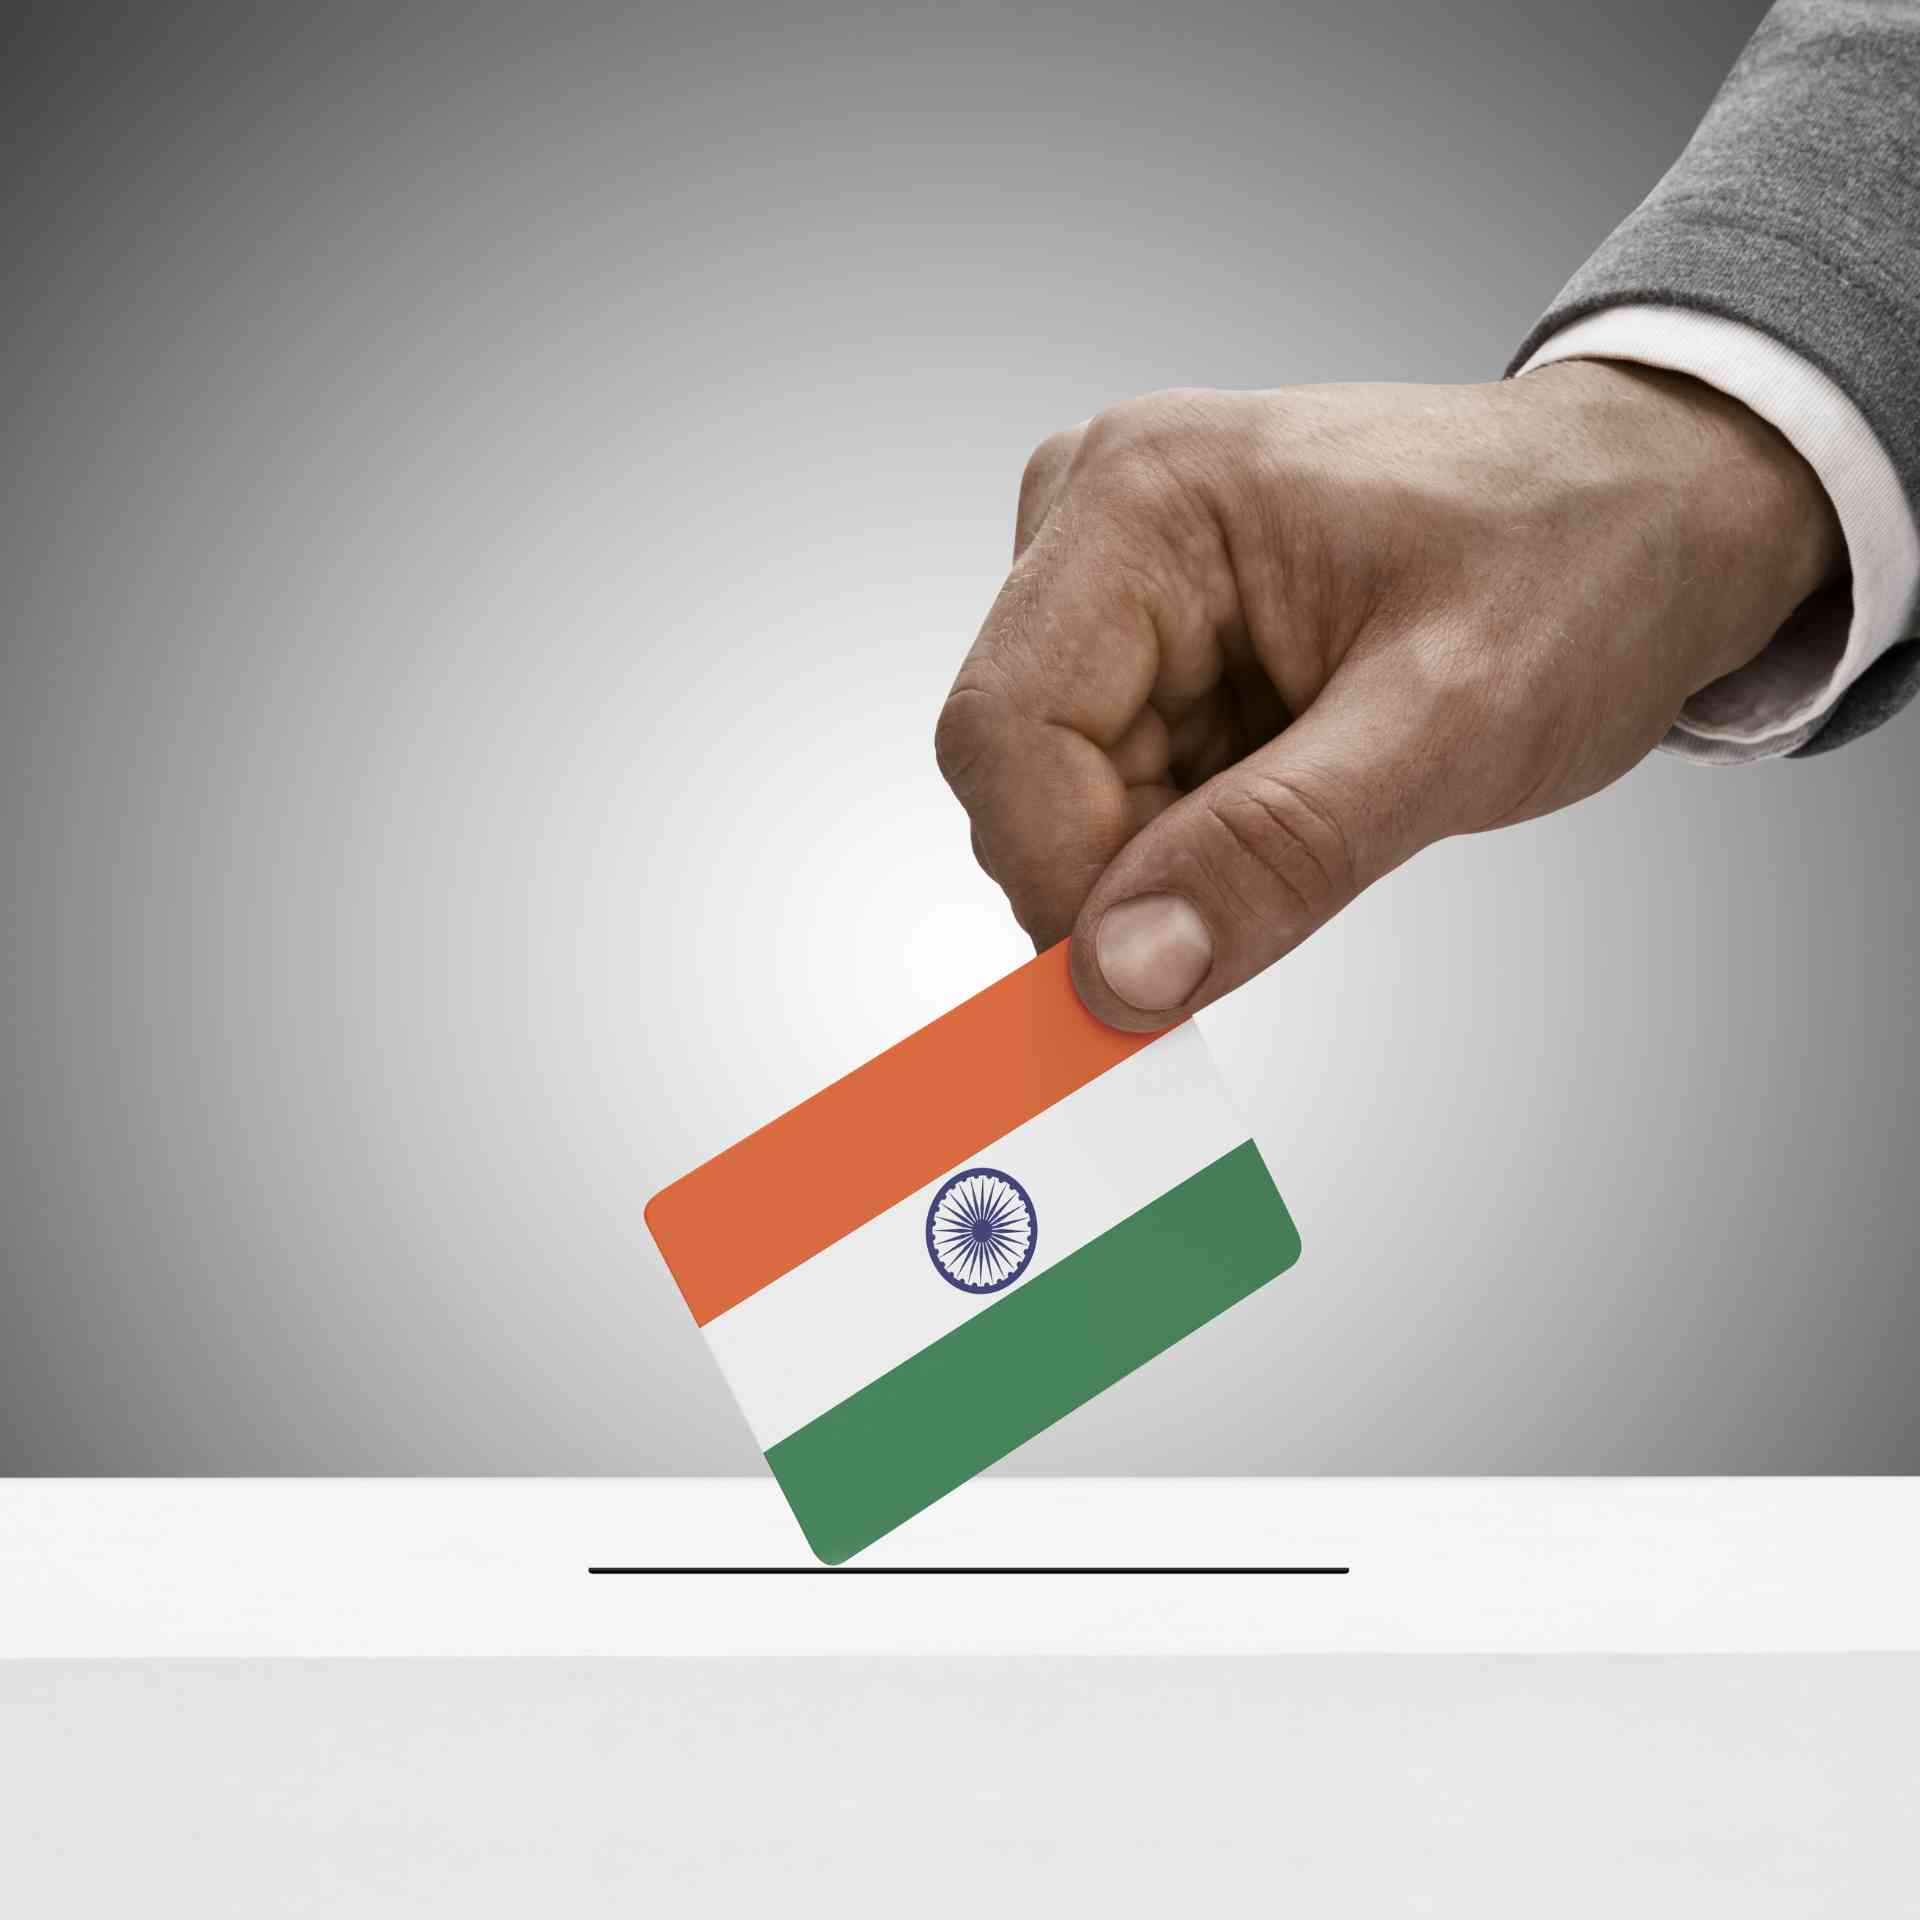 “Breaking News: India’s Election Commission Implements Fixes to Protect Citizens’ Data